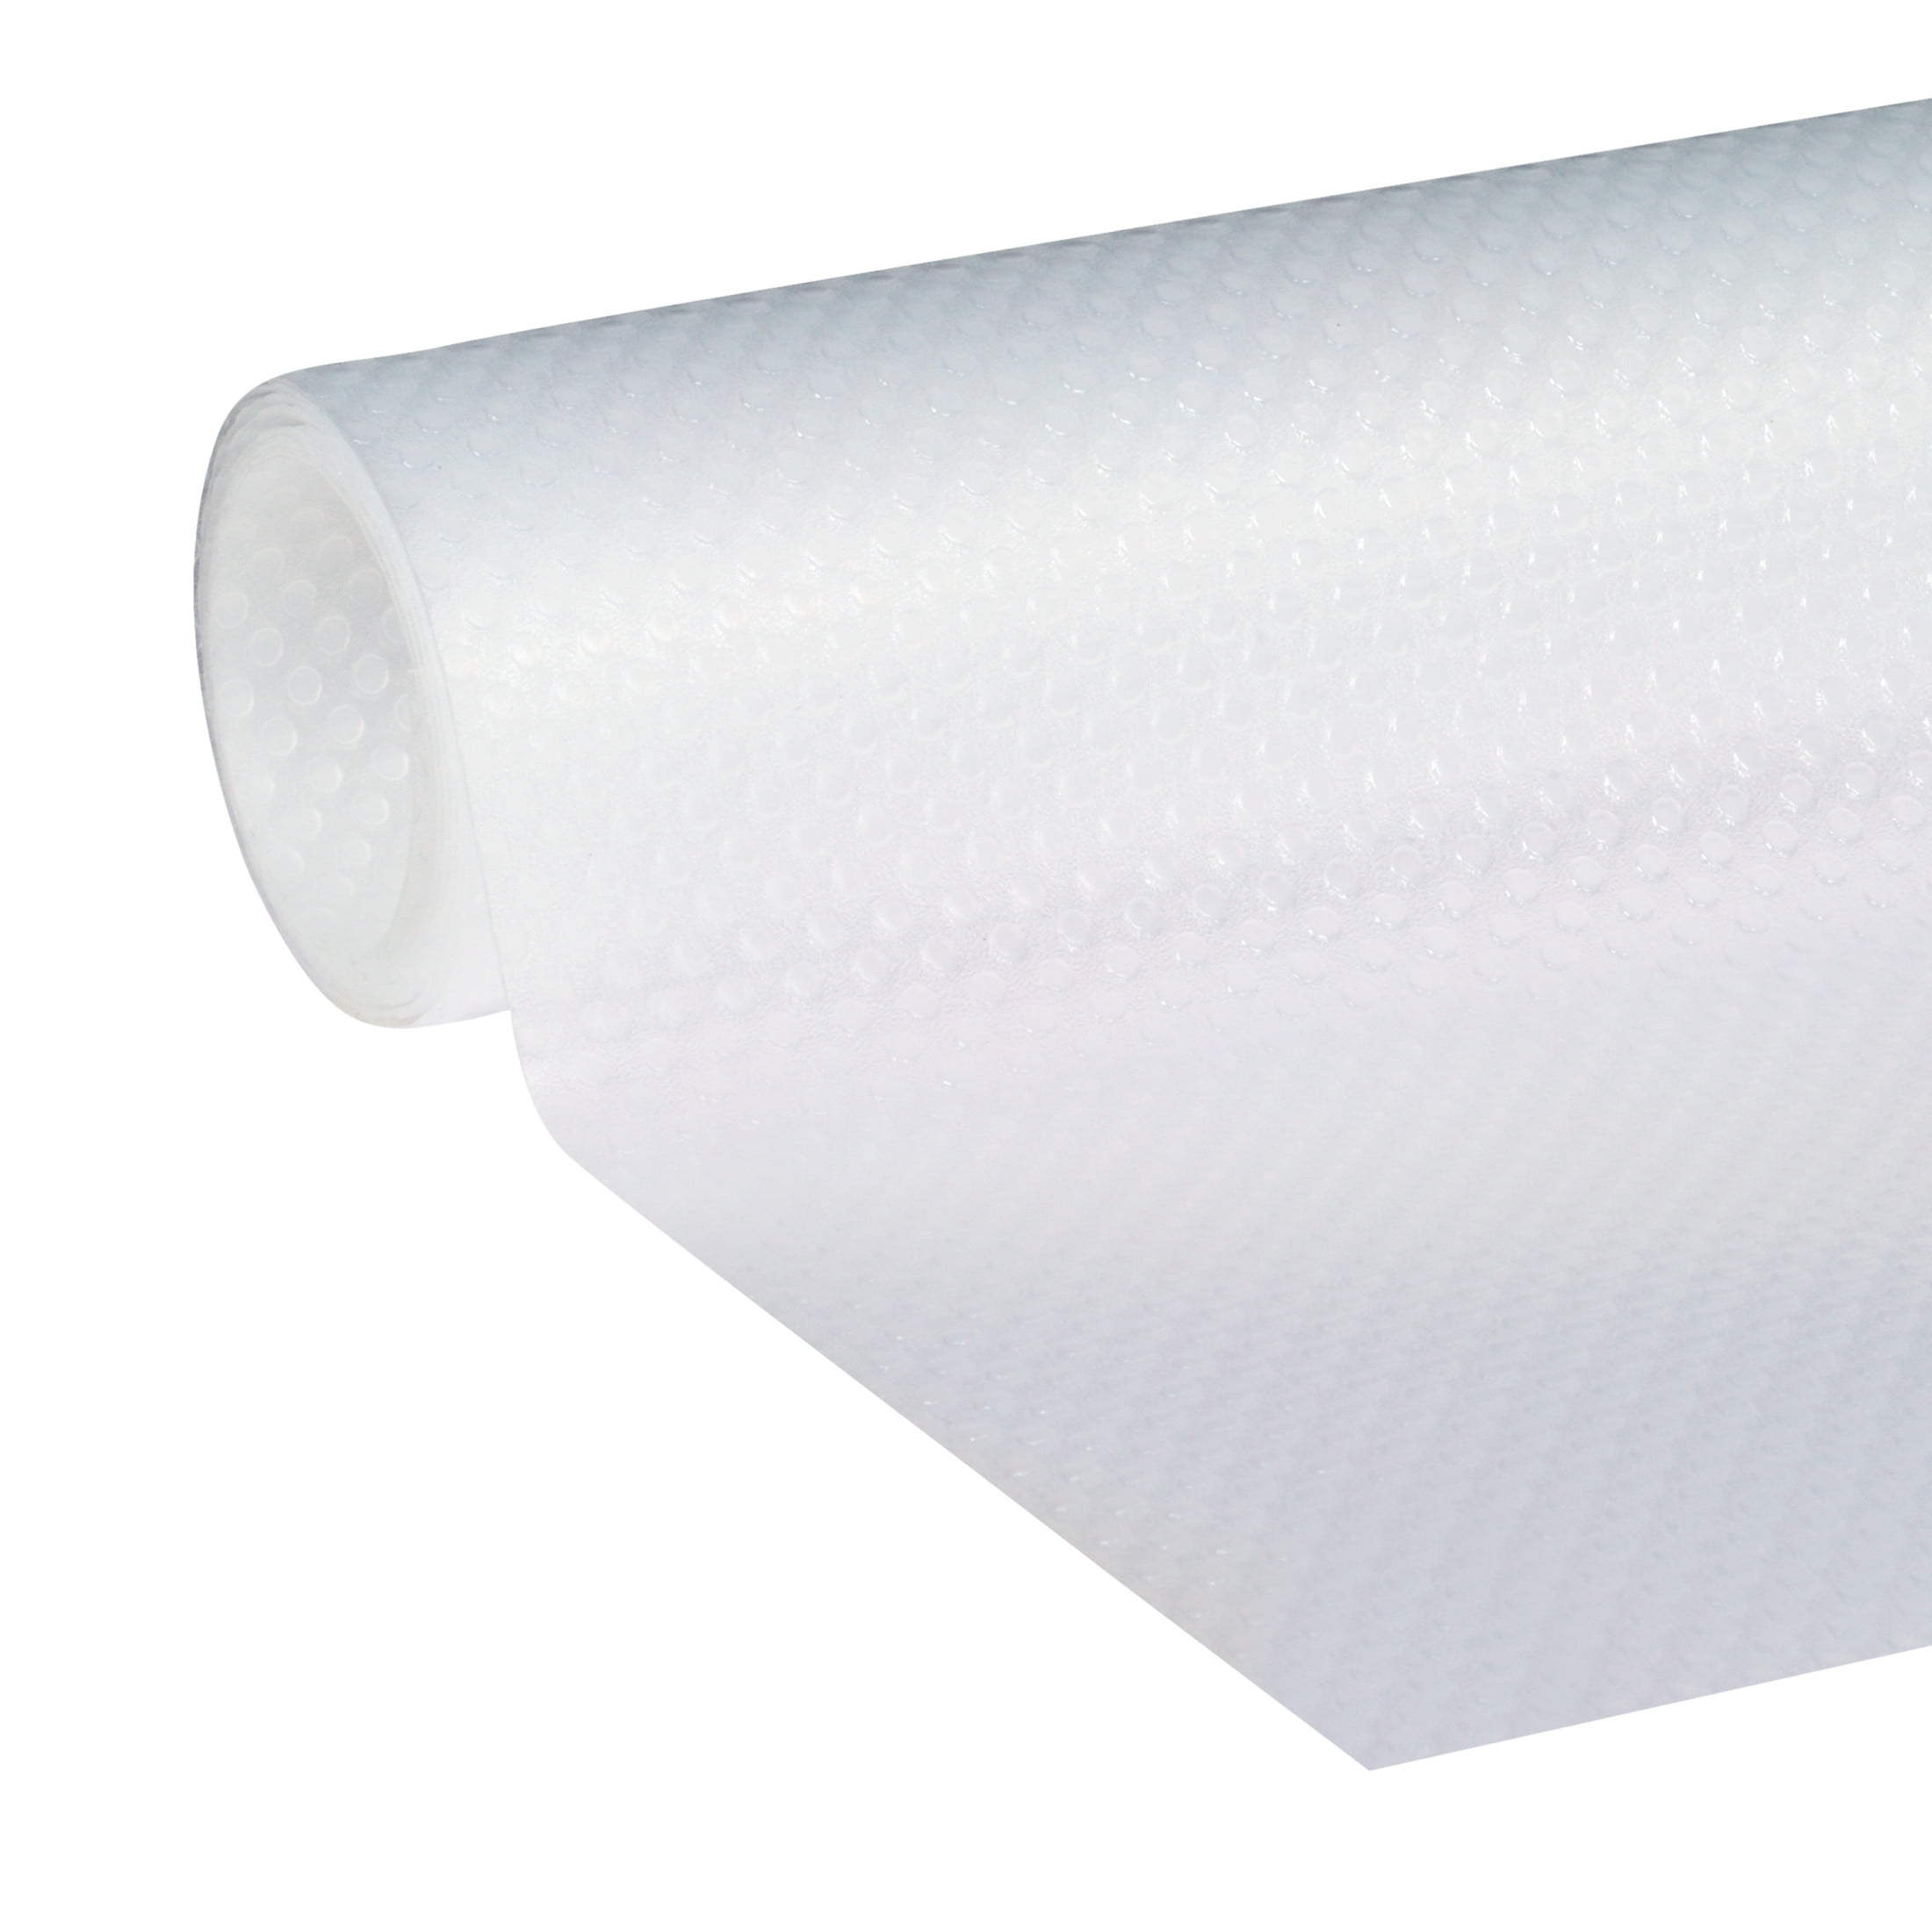 Clevr Premium 12 in. x 20 ft. Non-Adhesive Shelf Liner, Clear, 1 each -  Harris Teeter